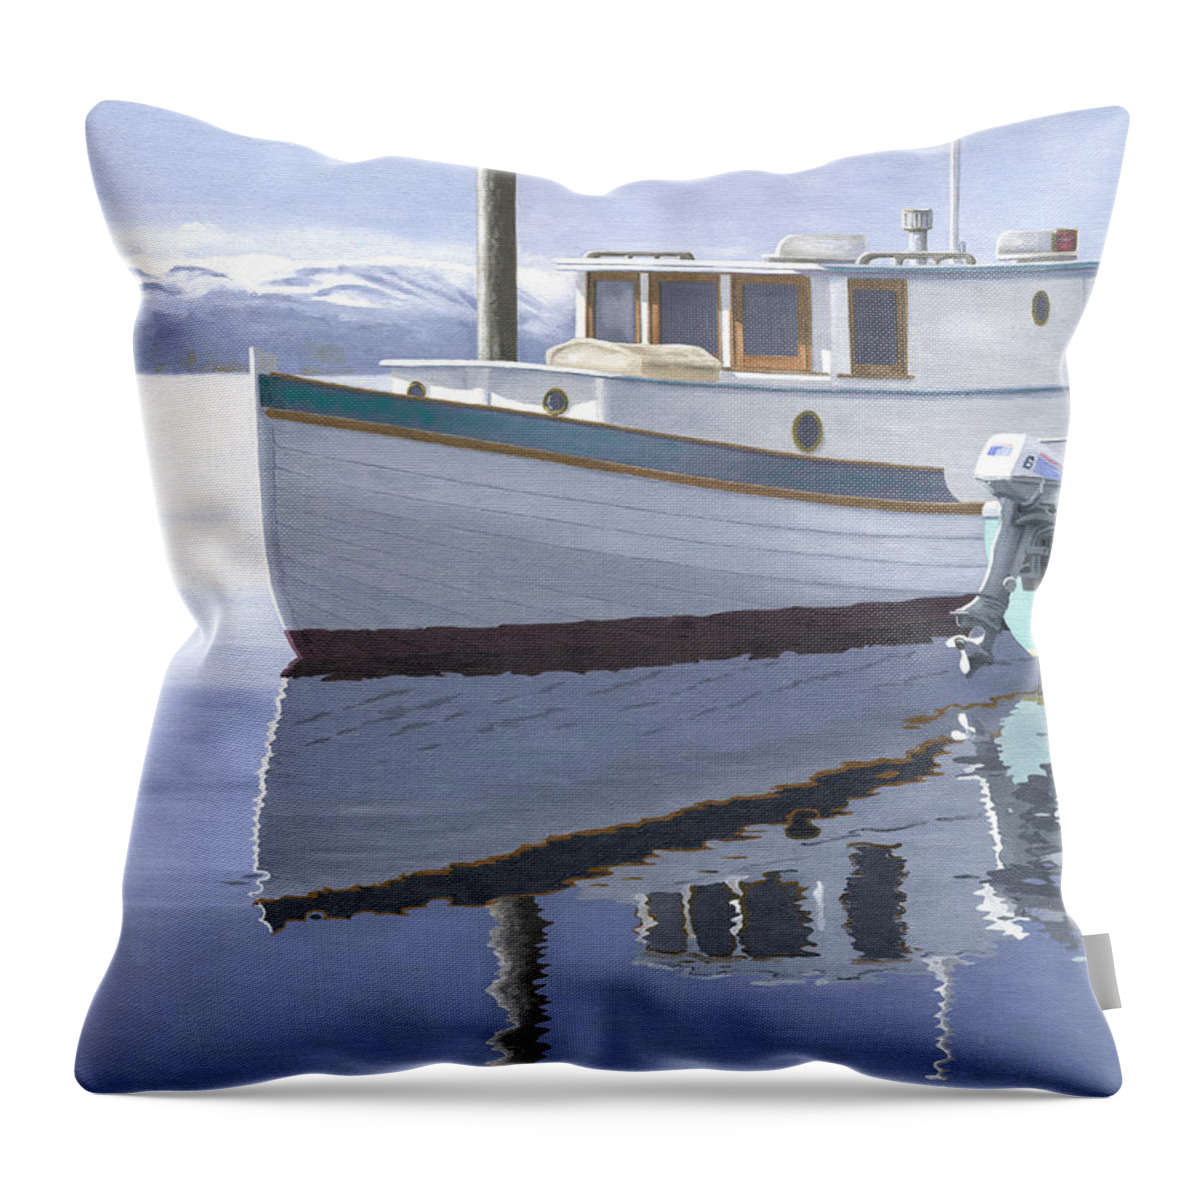 Marine Throw Pillow featuring the painting Winter Moorage by Gary Giacomelli